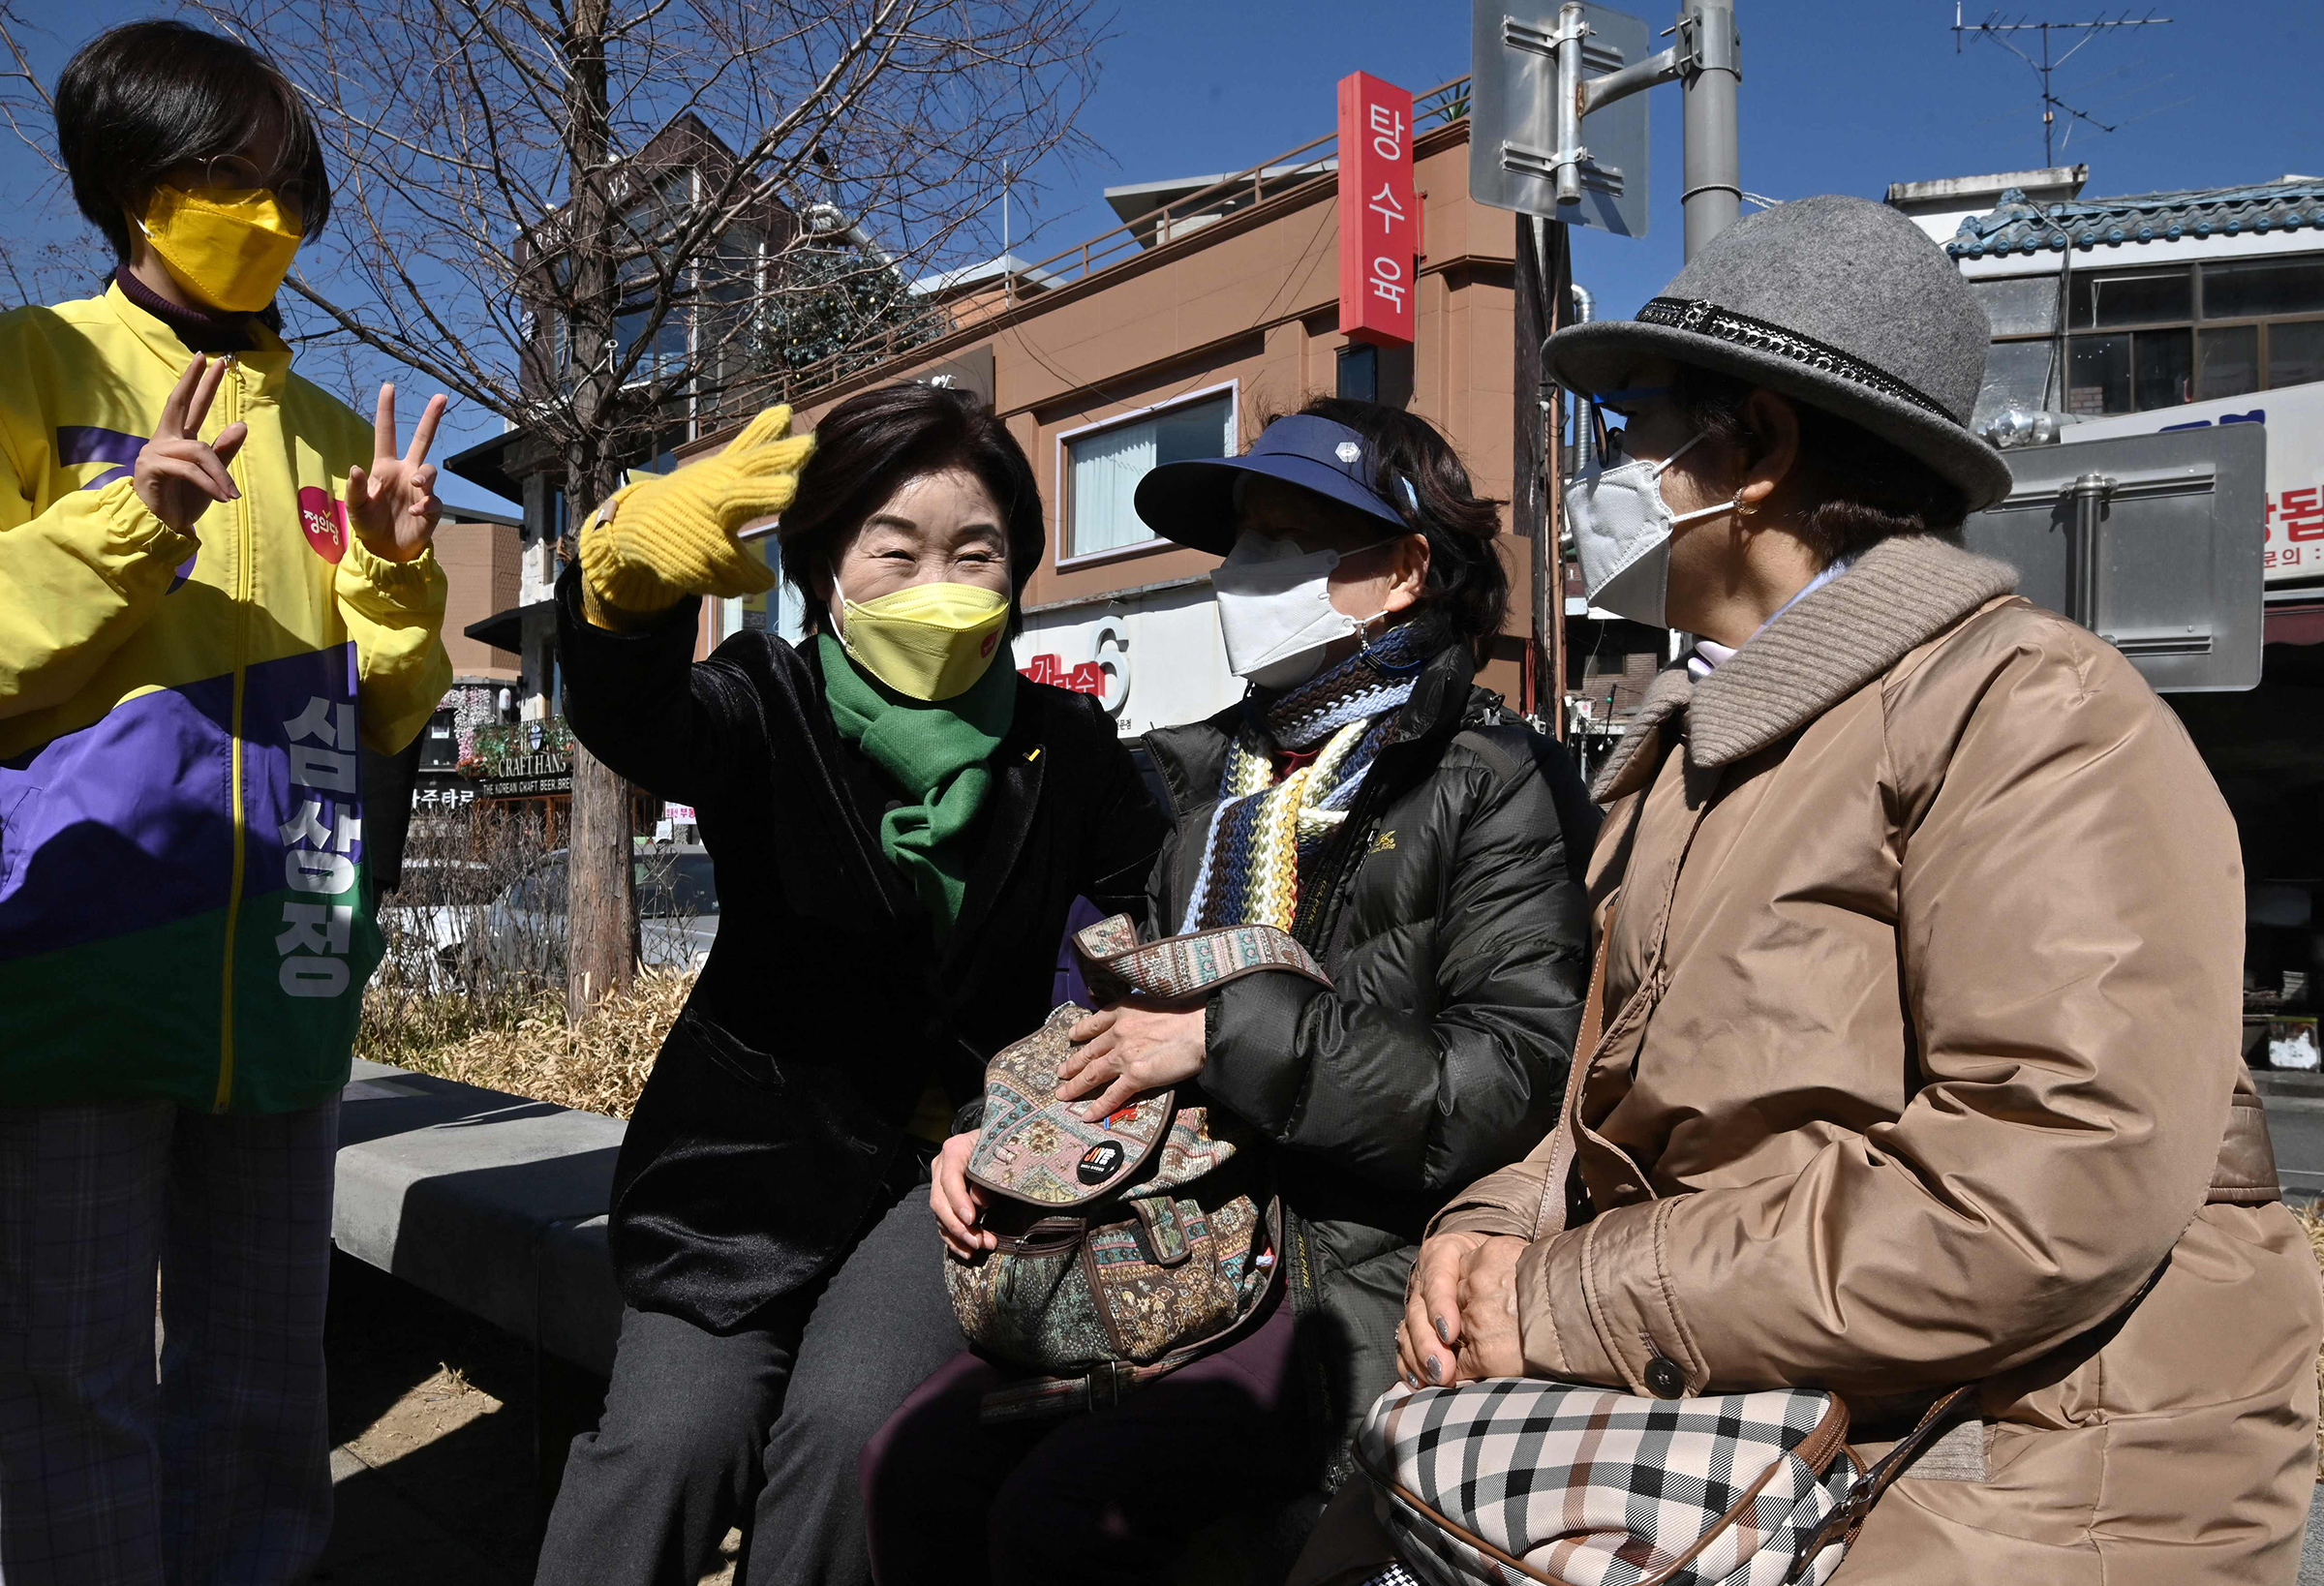 South Korean presidential candidate Sim Sang-jung, second from left, of the Justice Party talks with women during an election campaign in Seoul on March 6 (Jung Yeon-je—AFP/Getty Images)